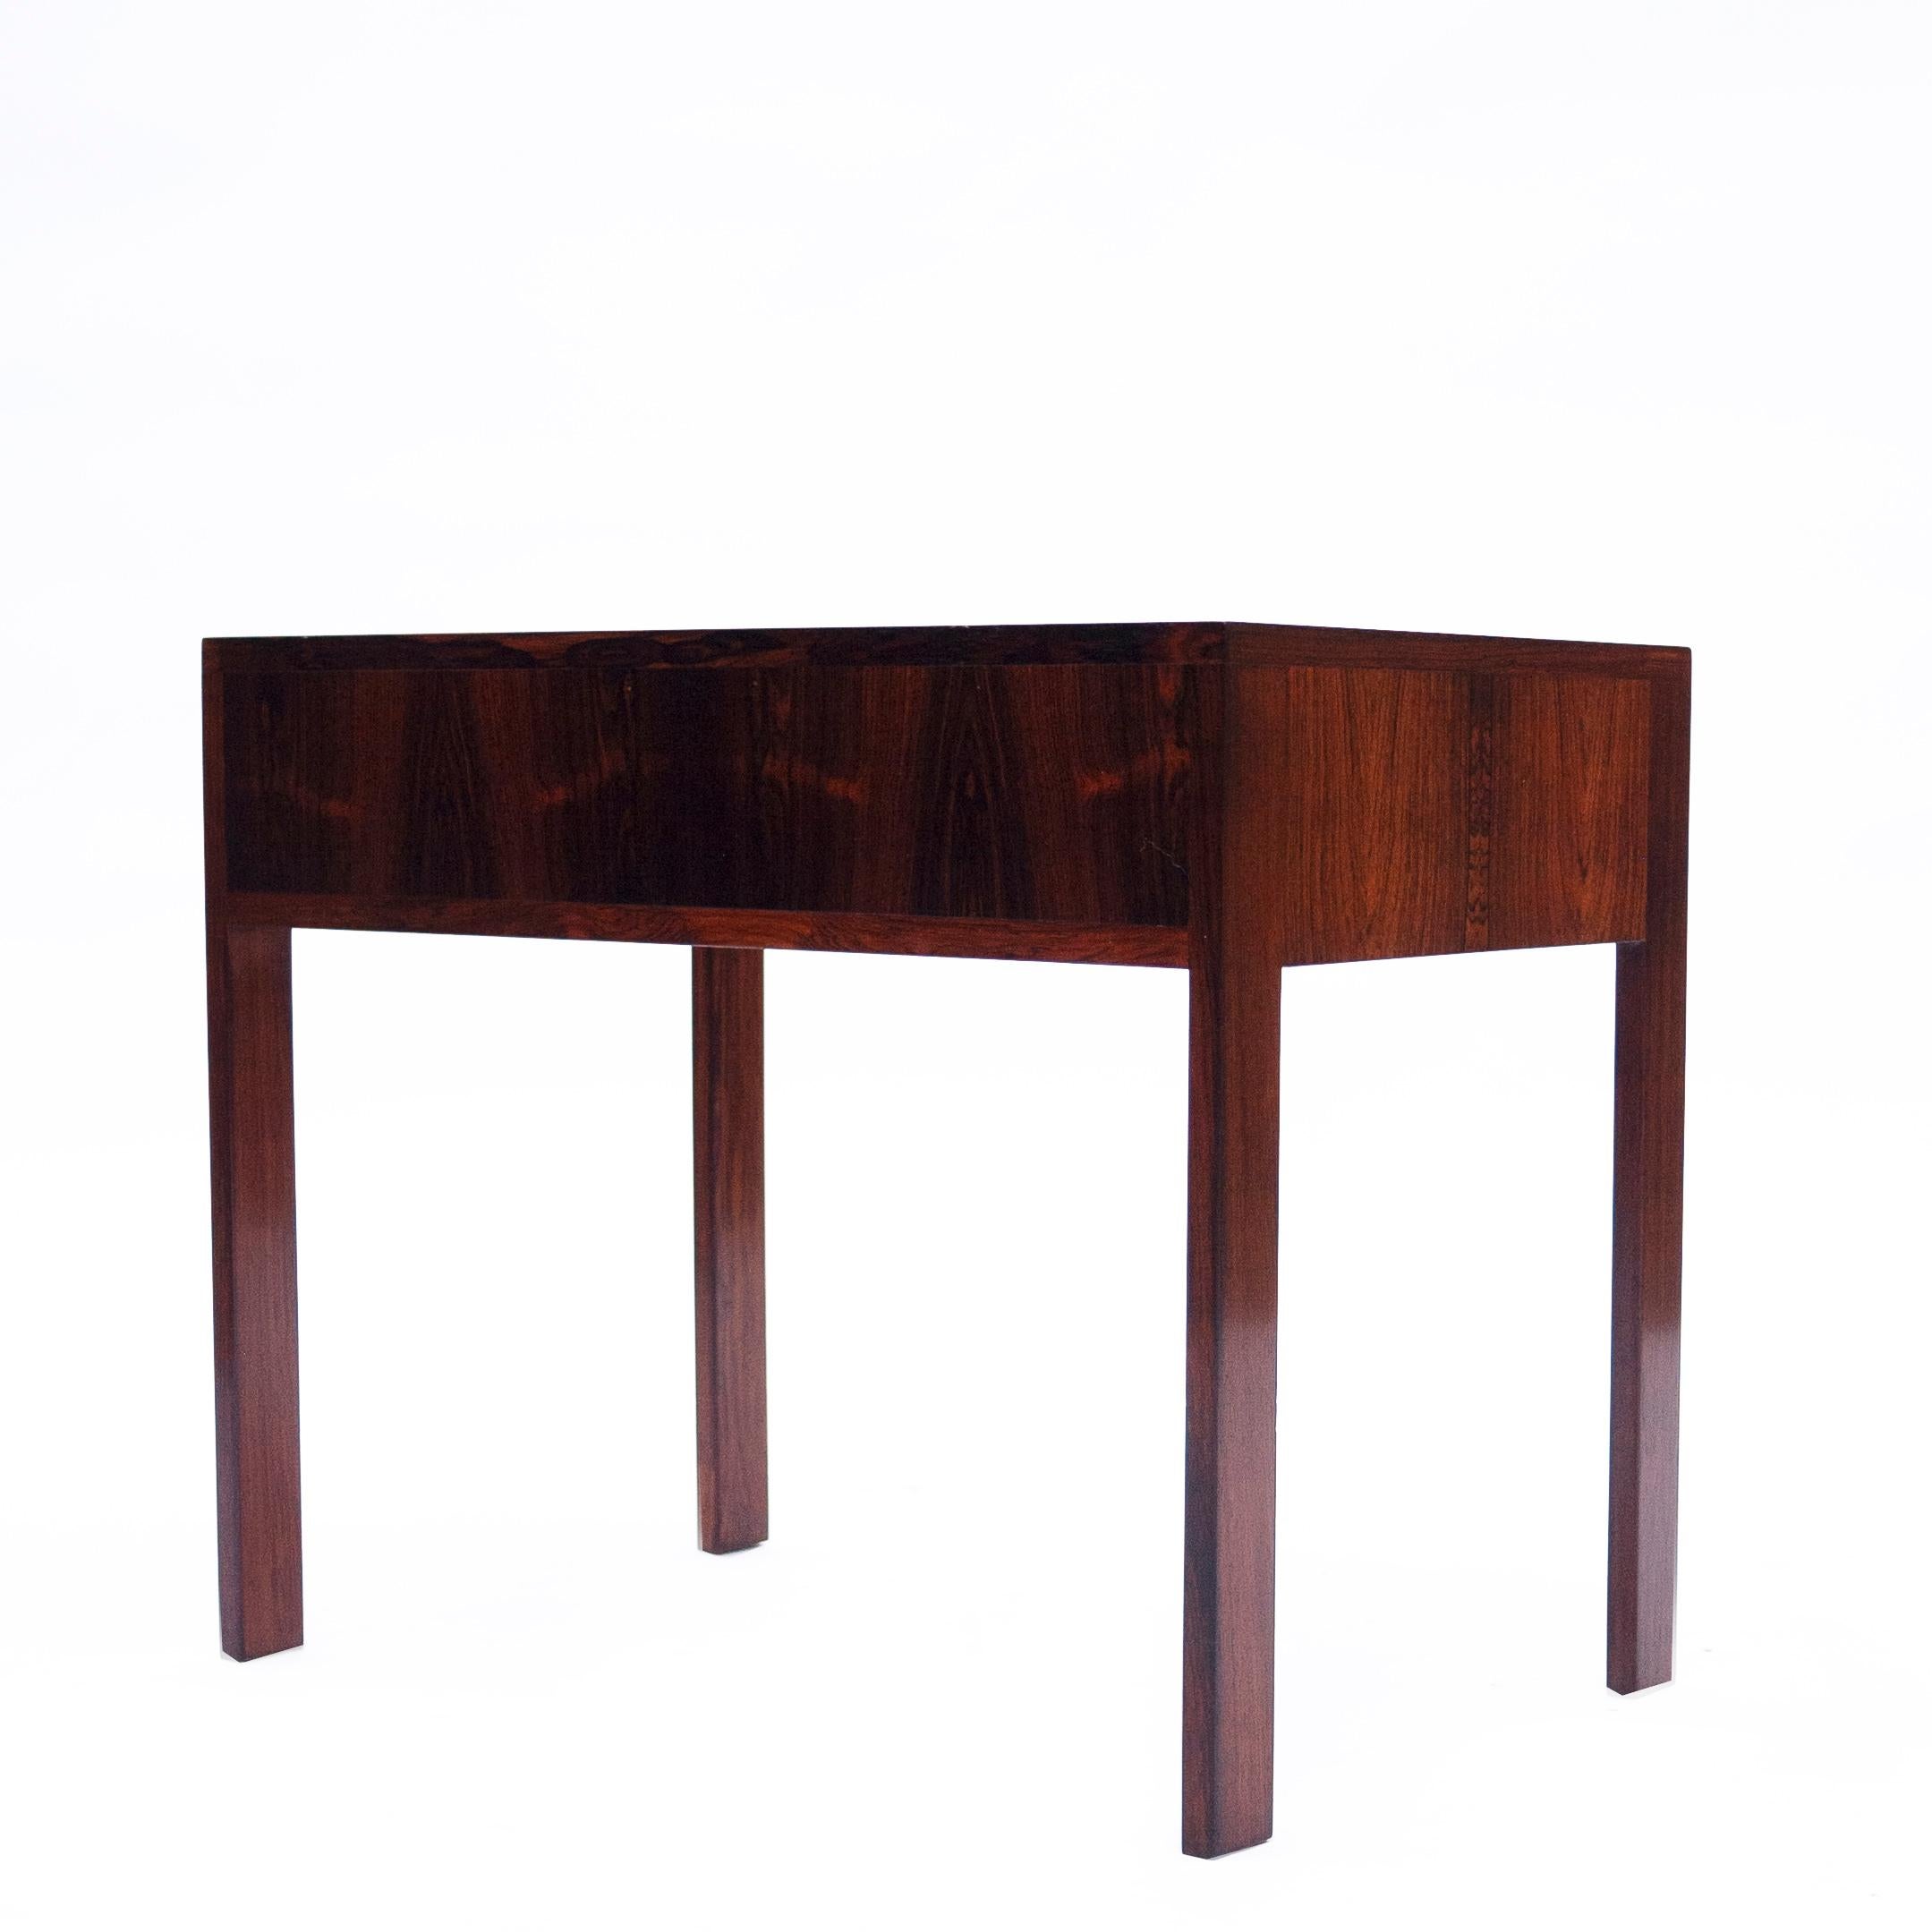 Mid-20th Century Scandinavian Nesting Tables and Side Table in Rosewood by Illum Wikkelsø, 1960s For Sale